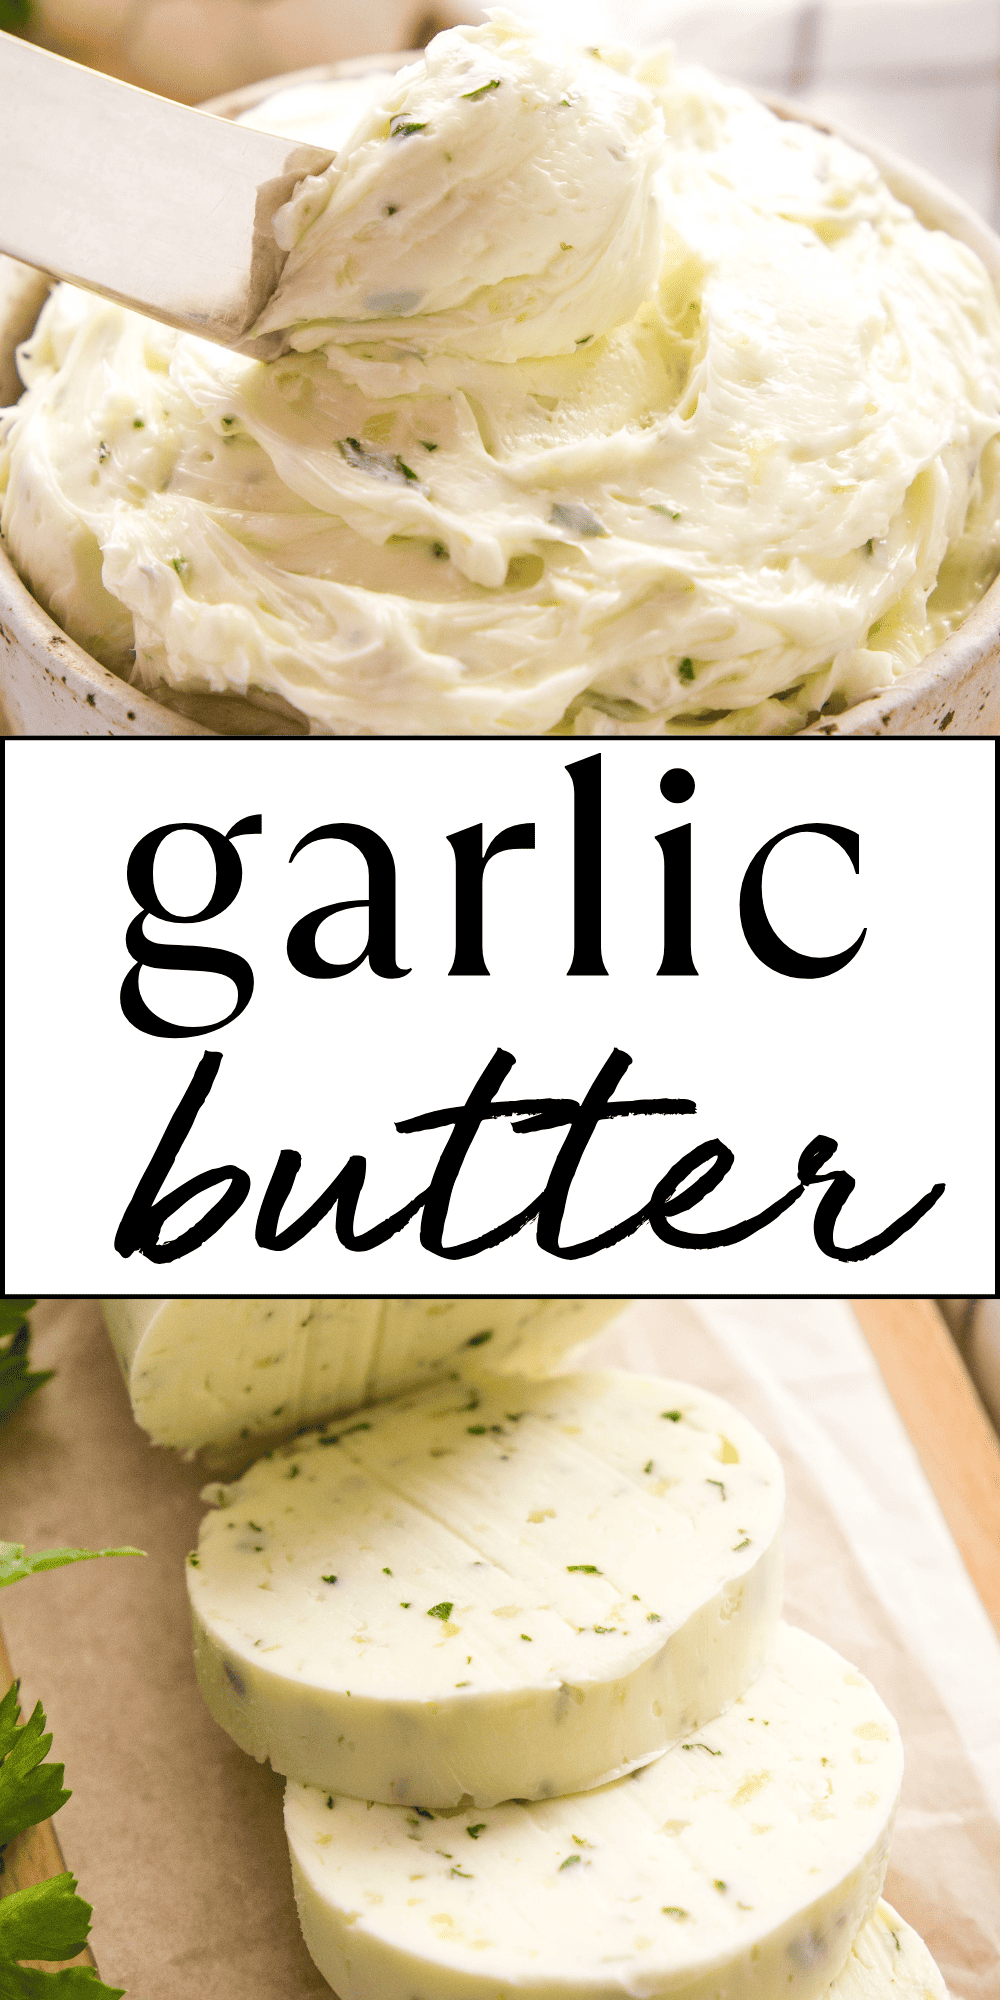 This Garlic Butter recipe is creamy and delicious, perfect to serve with grilled steak, chicken, seafood, grilled or steamed vegetables and more. It makes the BEST garlic bread and can be turned into a creamy garlic butter sauce! Make this easy garlic herb butter recipe with only 4 basic ingredients! Recipe from thebusybaker.ca! #garlicbutter #garlicbuttersauce #easygarlicbutter #garlicherbbutter #garlicbread #garlicbutterrecipe via @busybakerblog